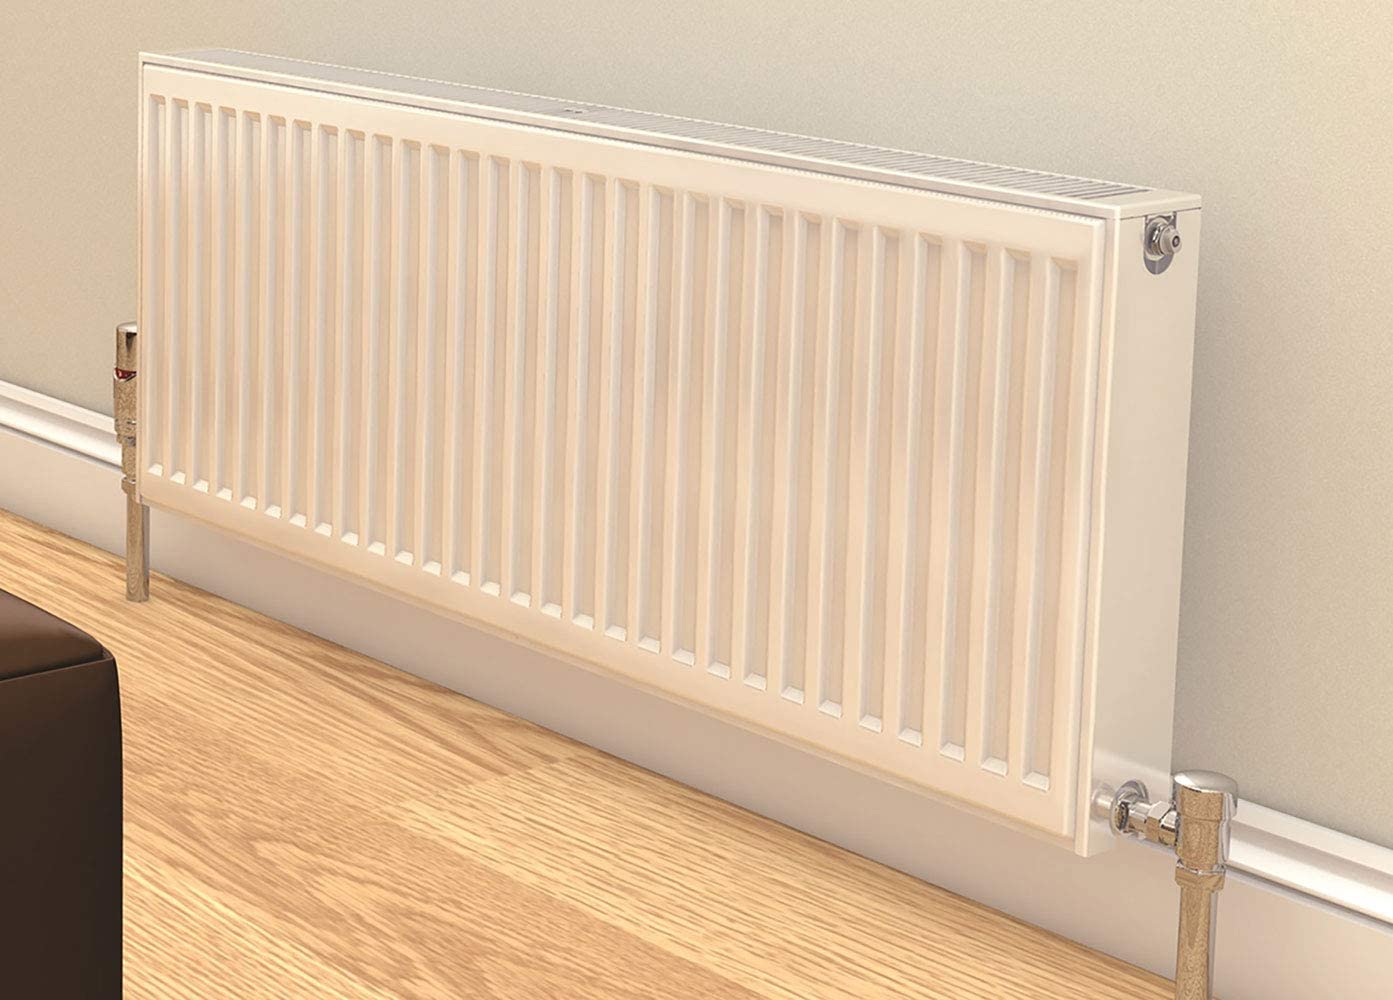 A Little Bit About Type 22 Double Panel Radiator